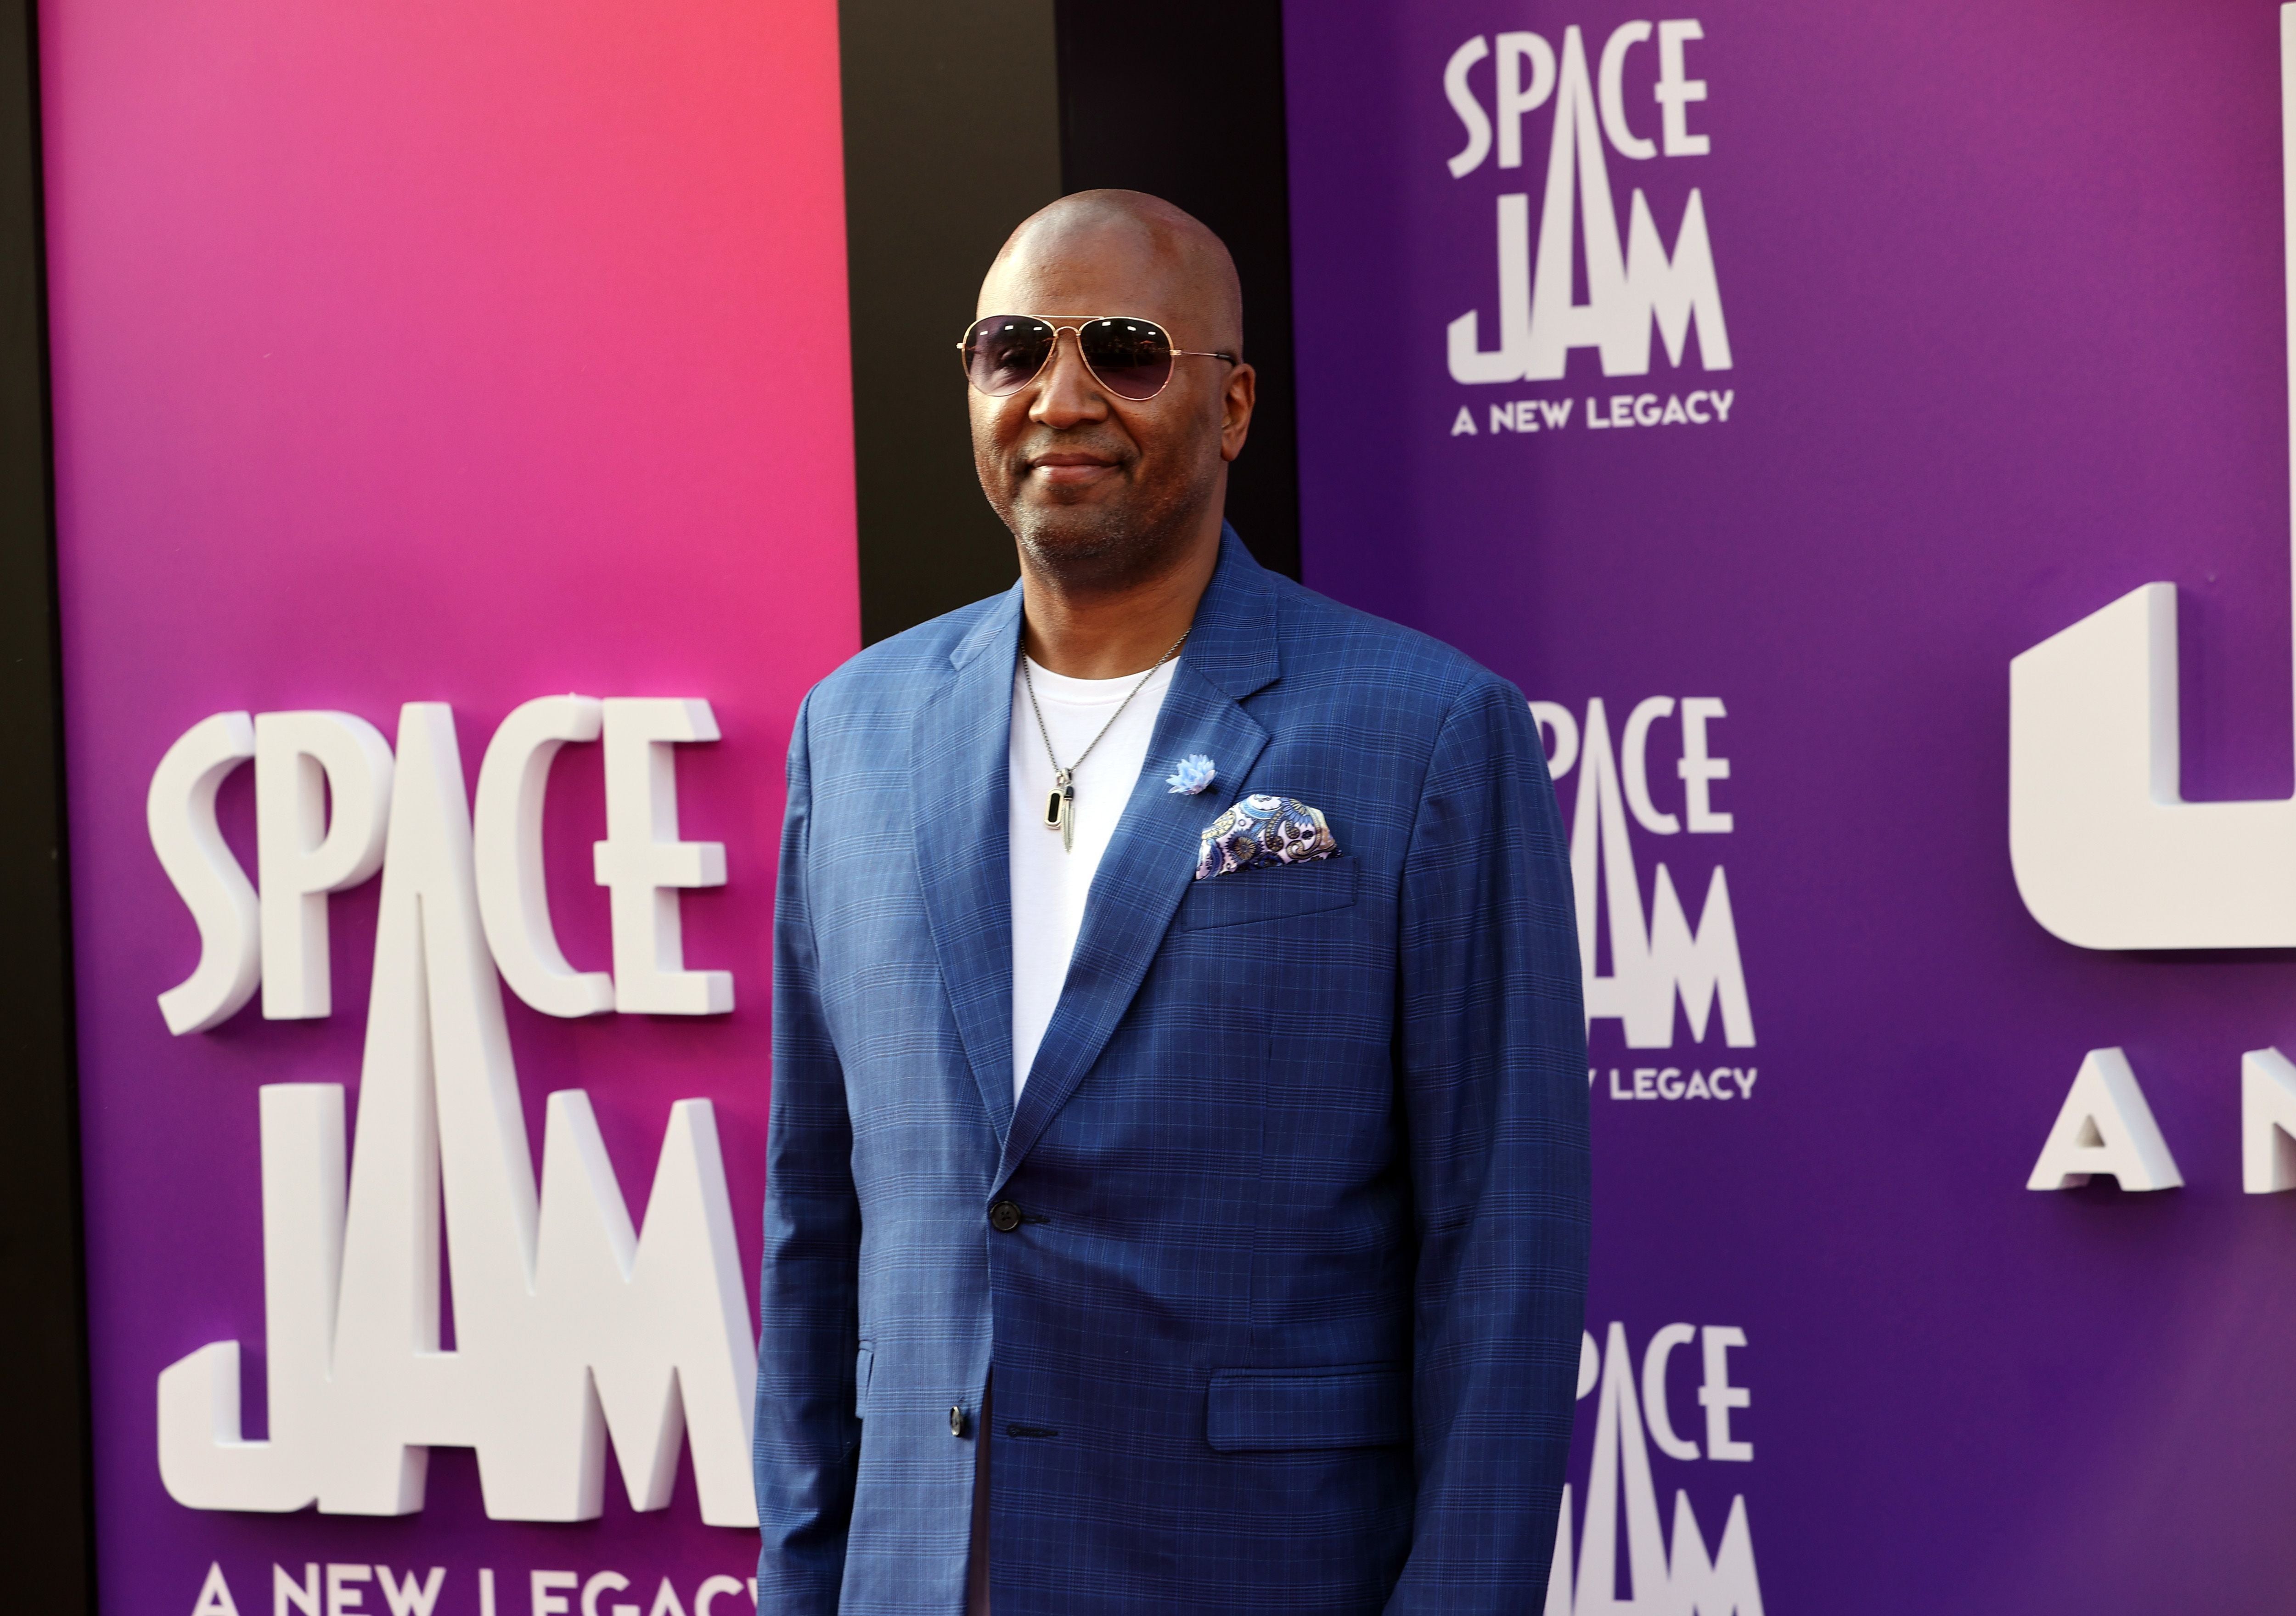 Malcolm Lee at the premiere of ‘Space Jam: A New Legacy’ in Los Angeles on 12 July